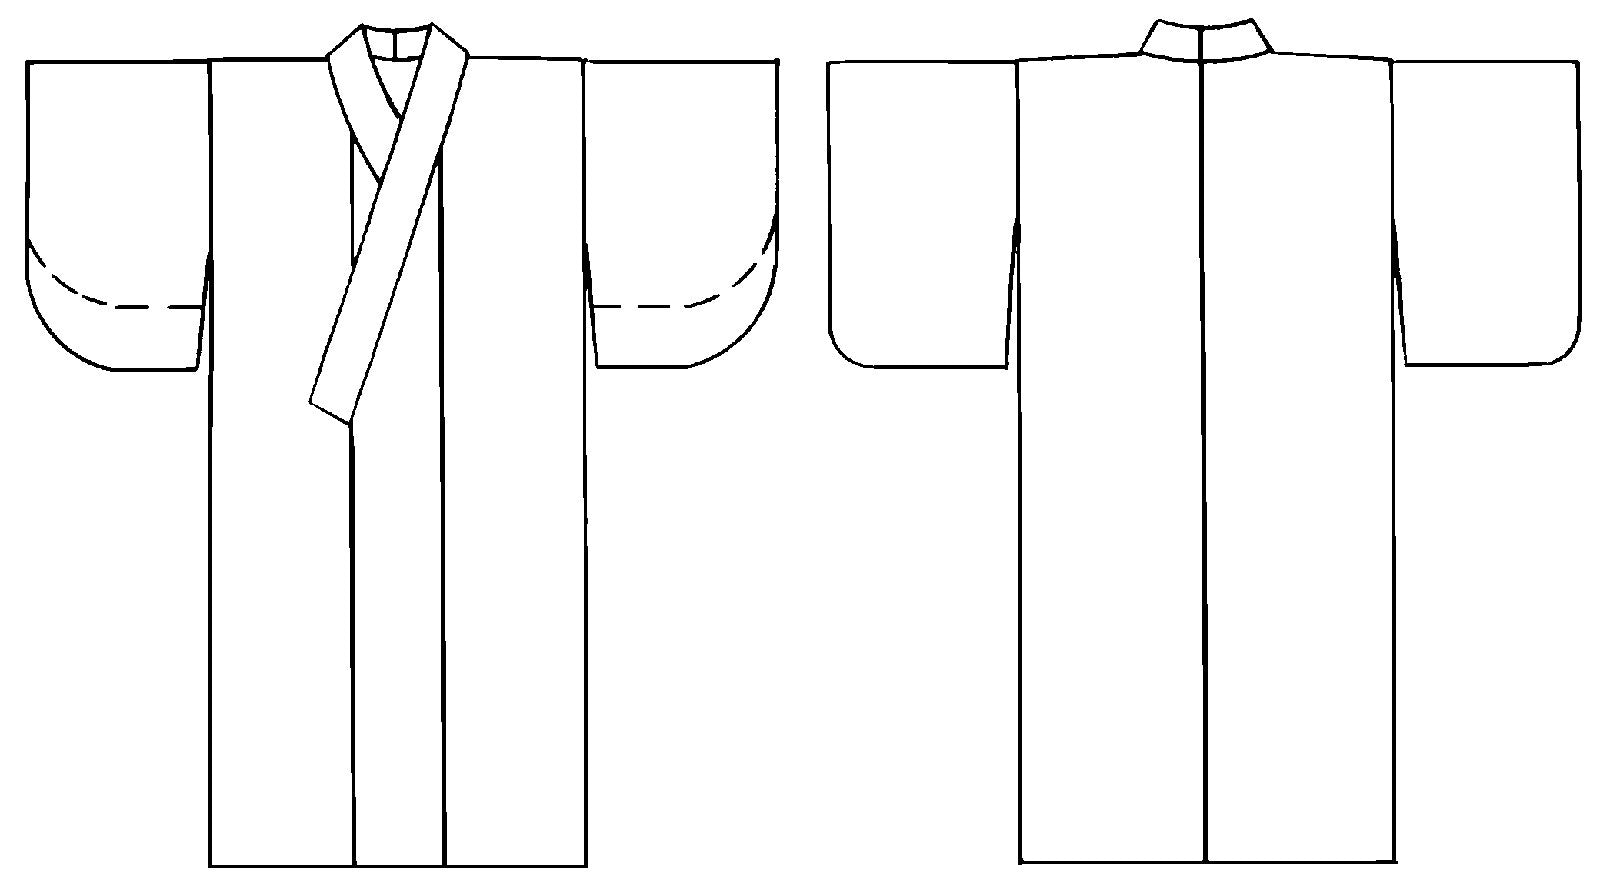 Flat line drawings of front and back views of Kimono